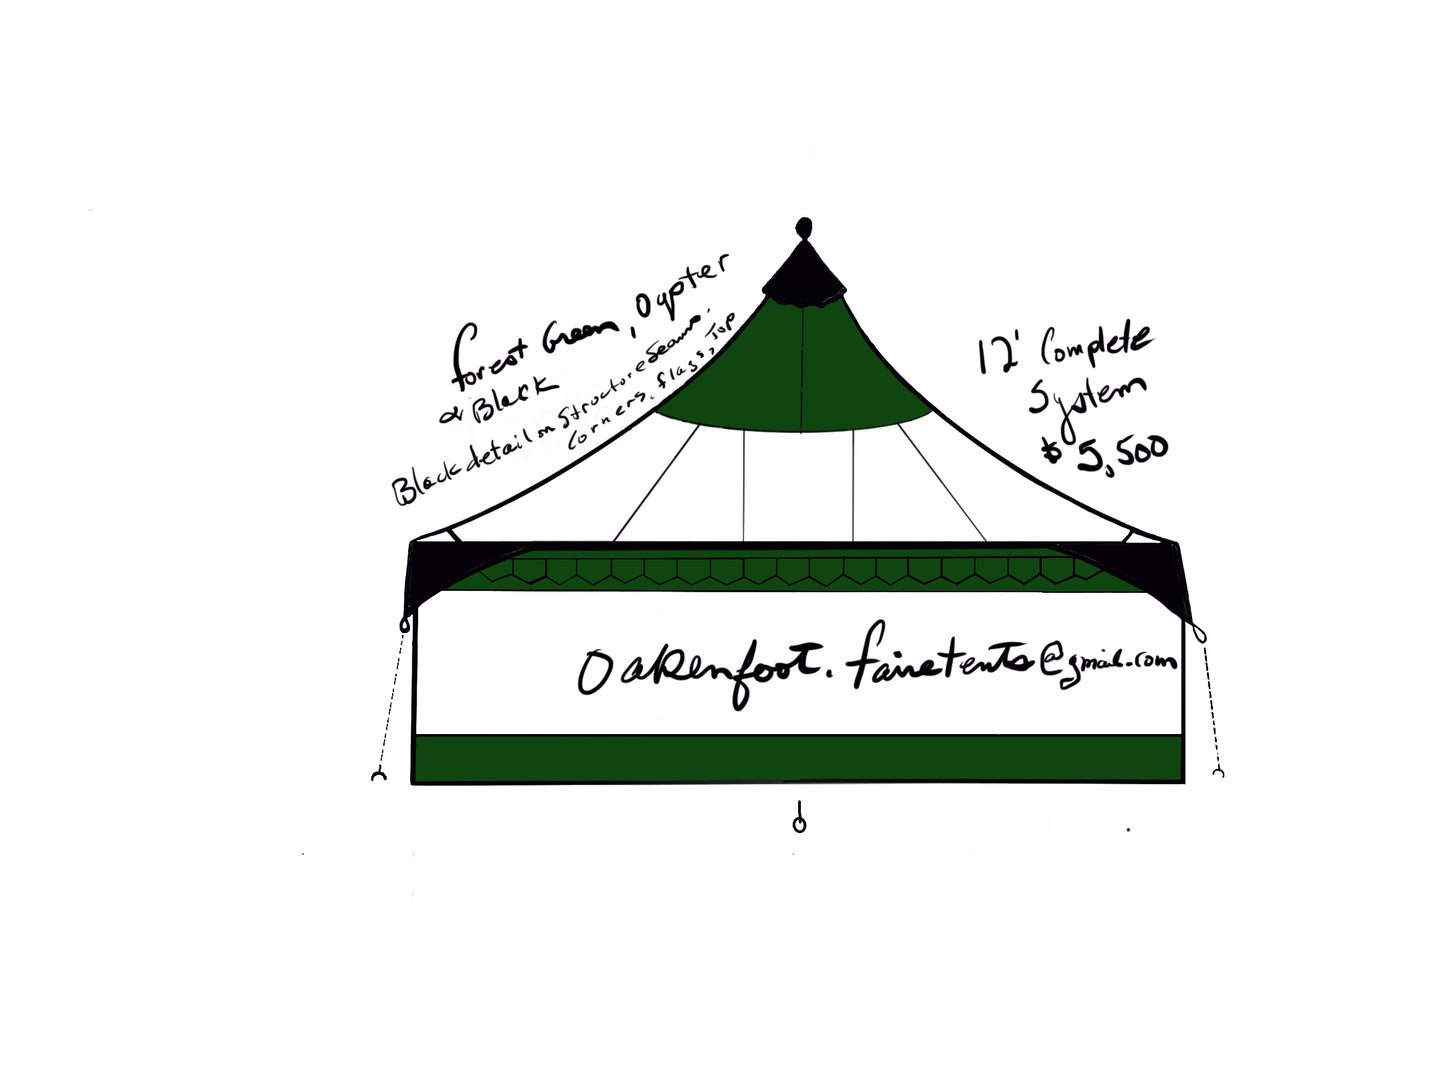 Oakenfoot Faire Tents 10', 12', & 15-foot square, tent system